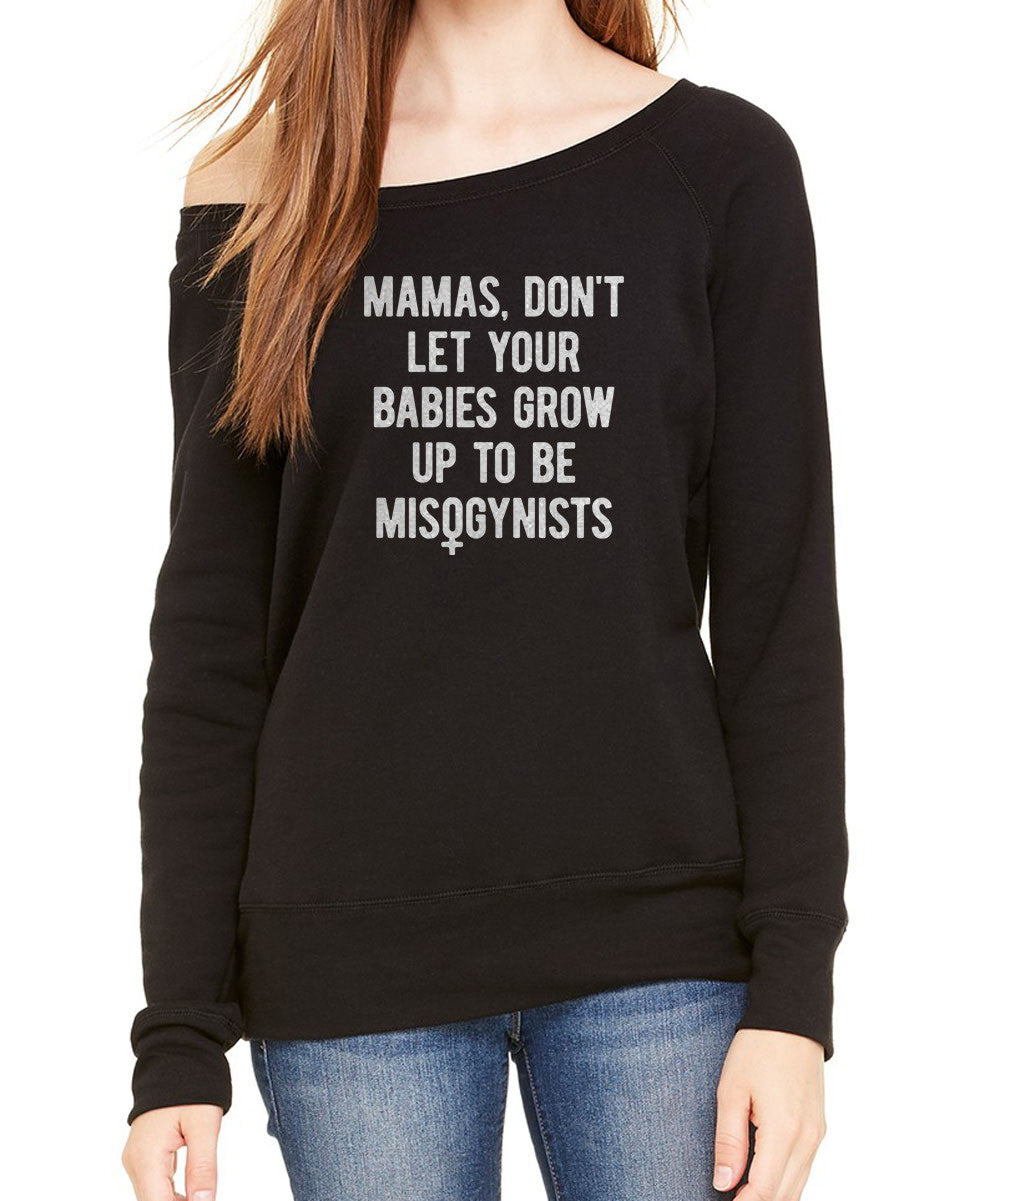 Women's Mamas Don't Let Your Babies Grow Up to be Misogynists Scoop Neck Fleece